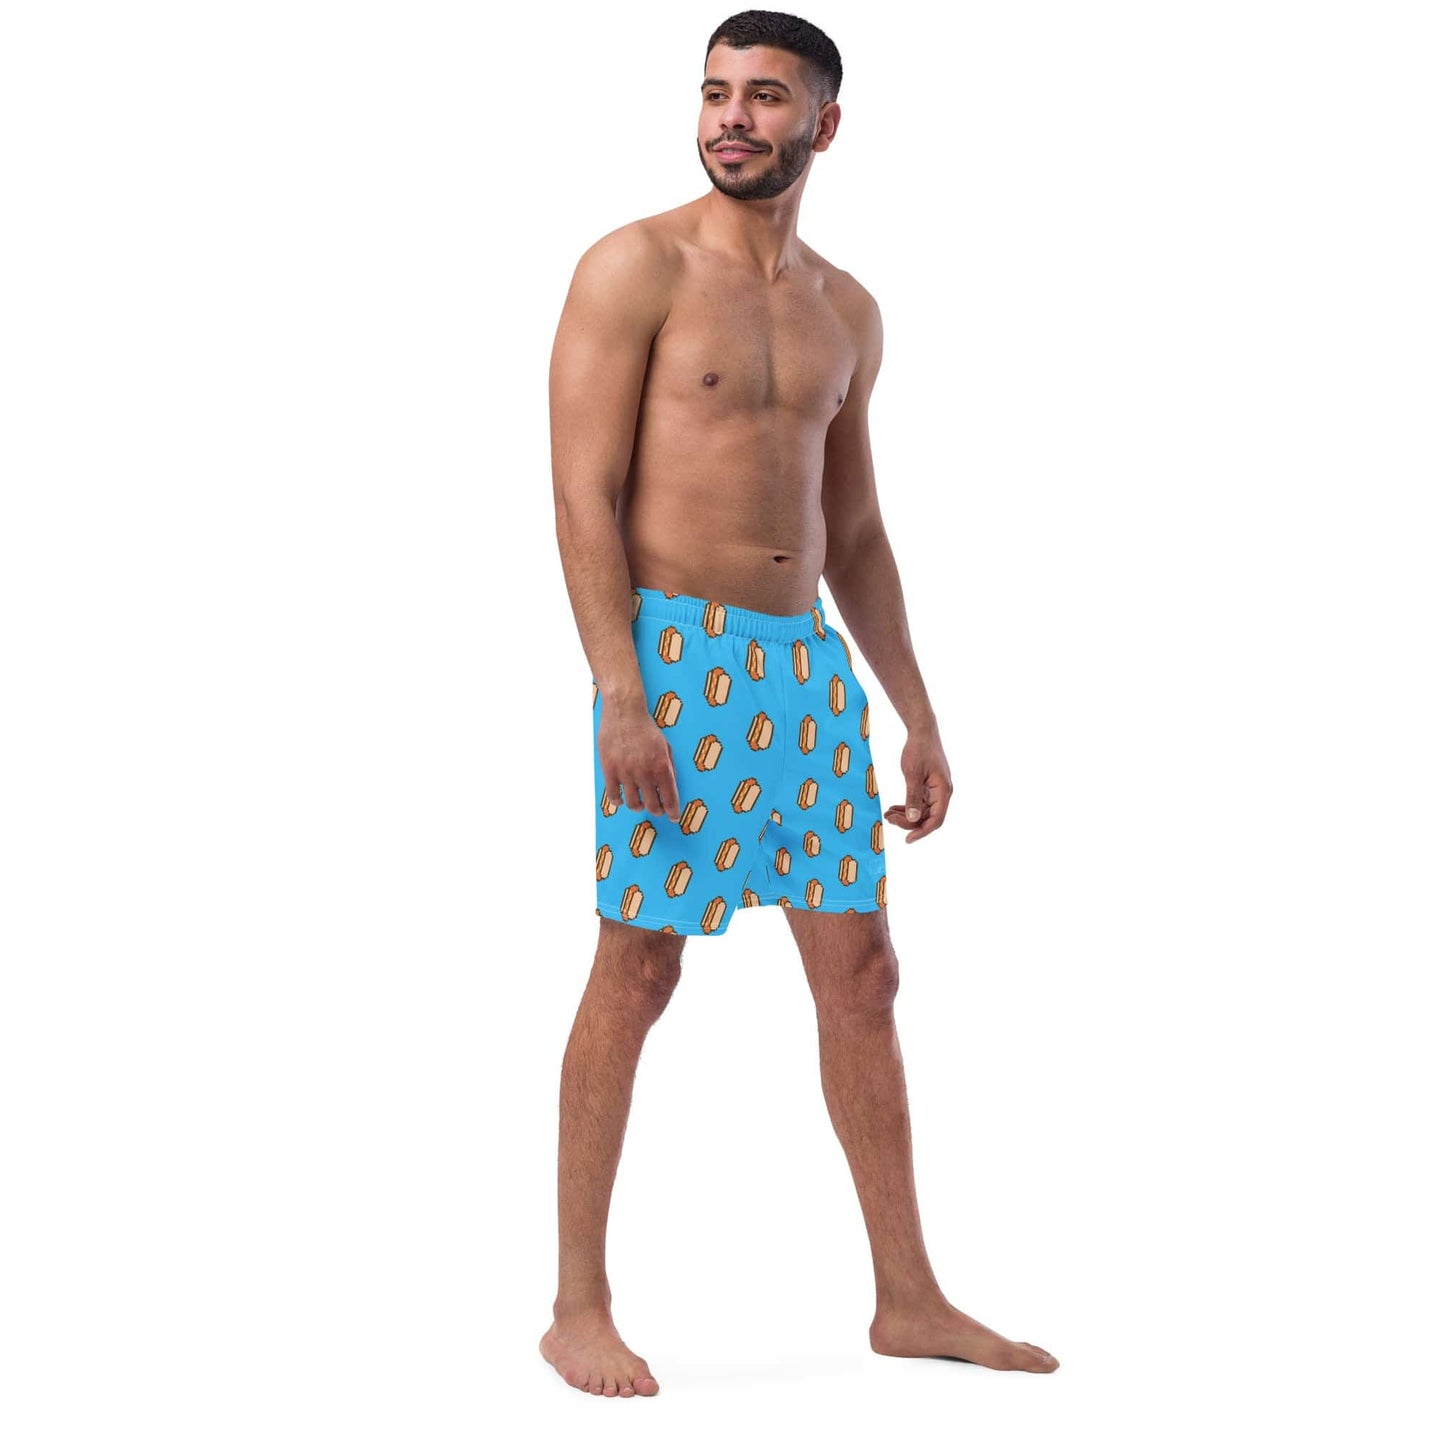 Local Summer Collective Glizzy Fest All-Over Print Recycled Boardshorts